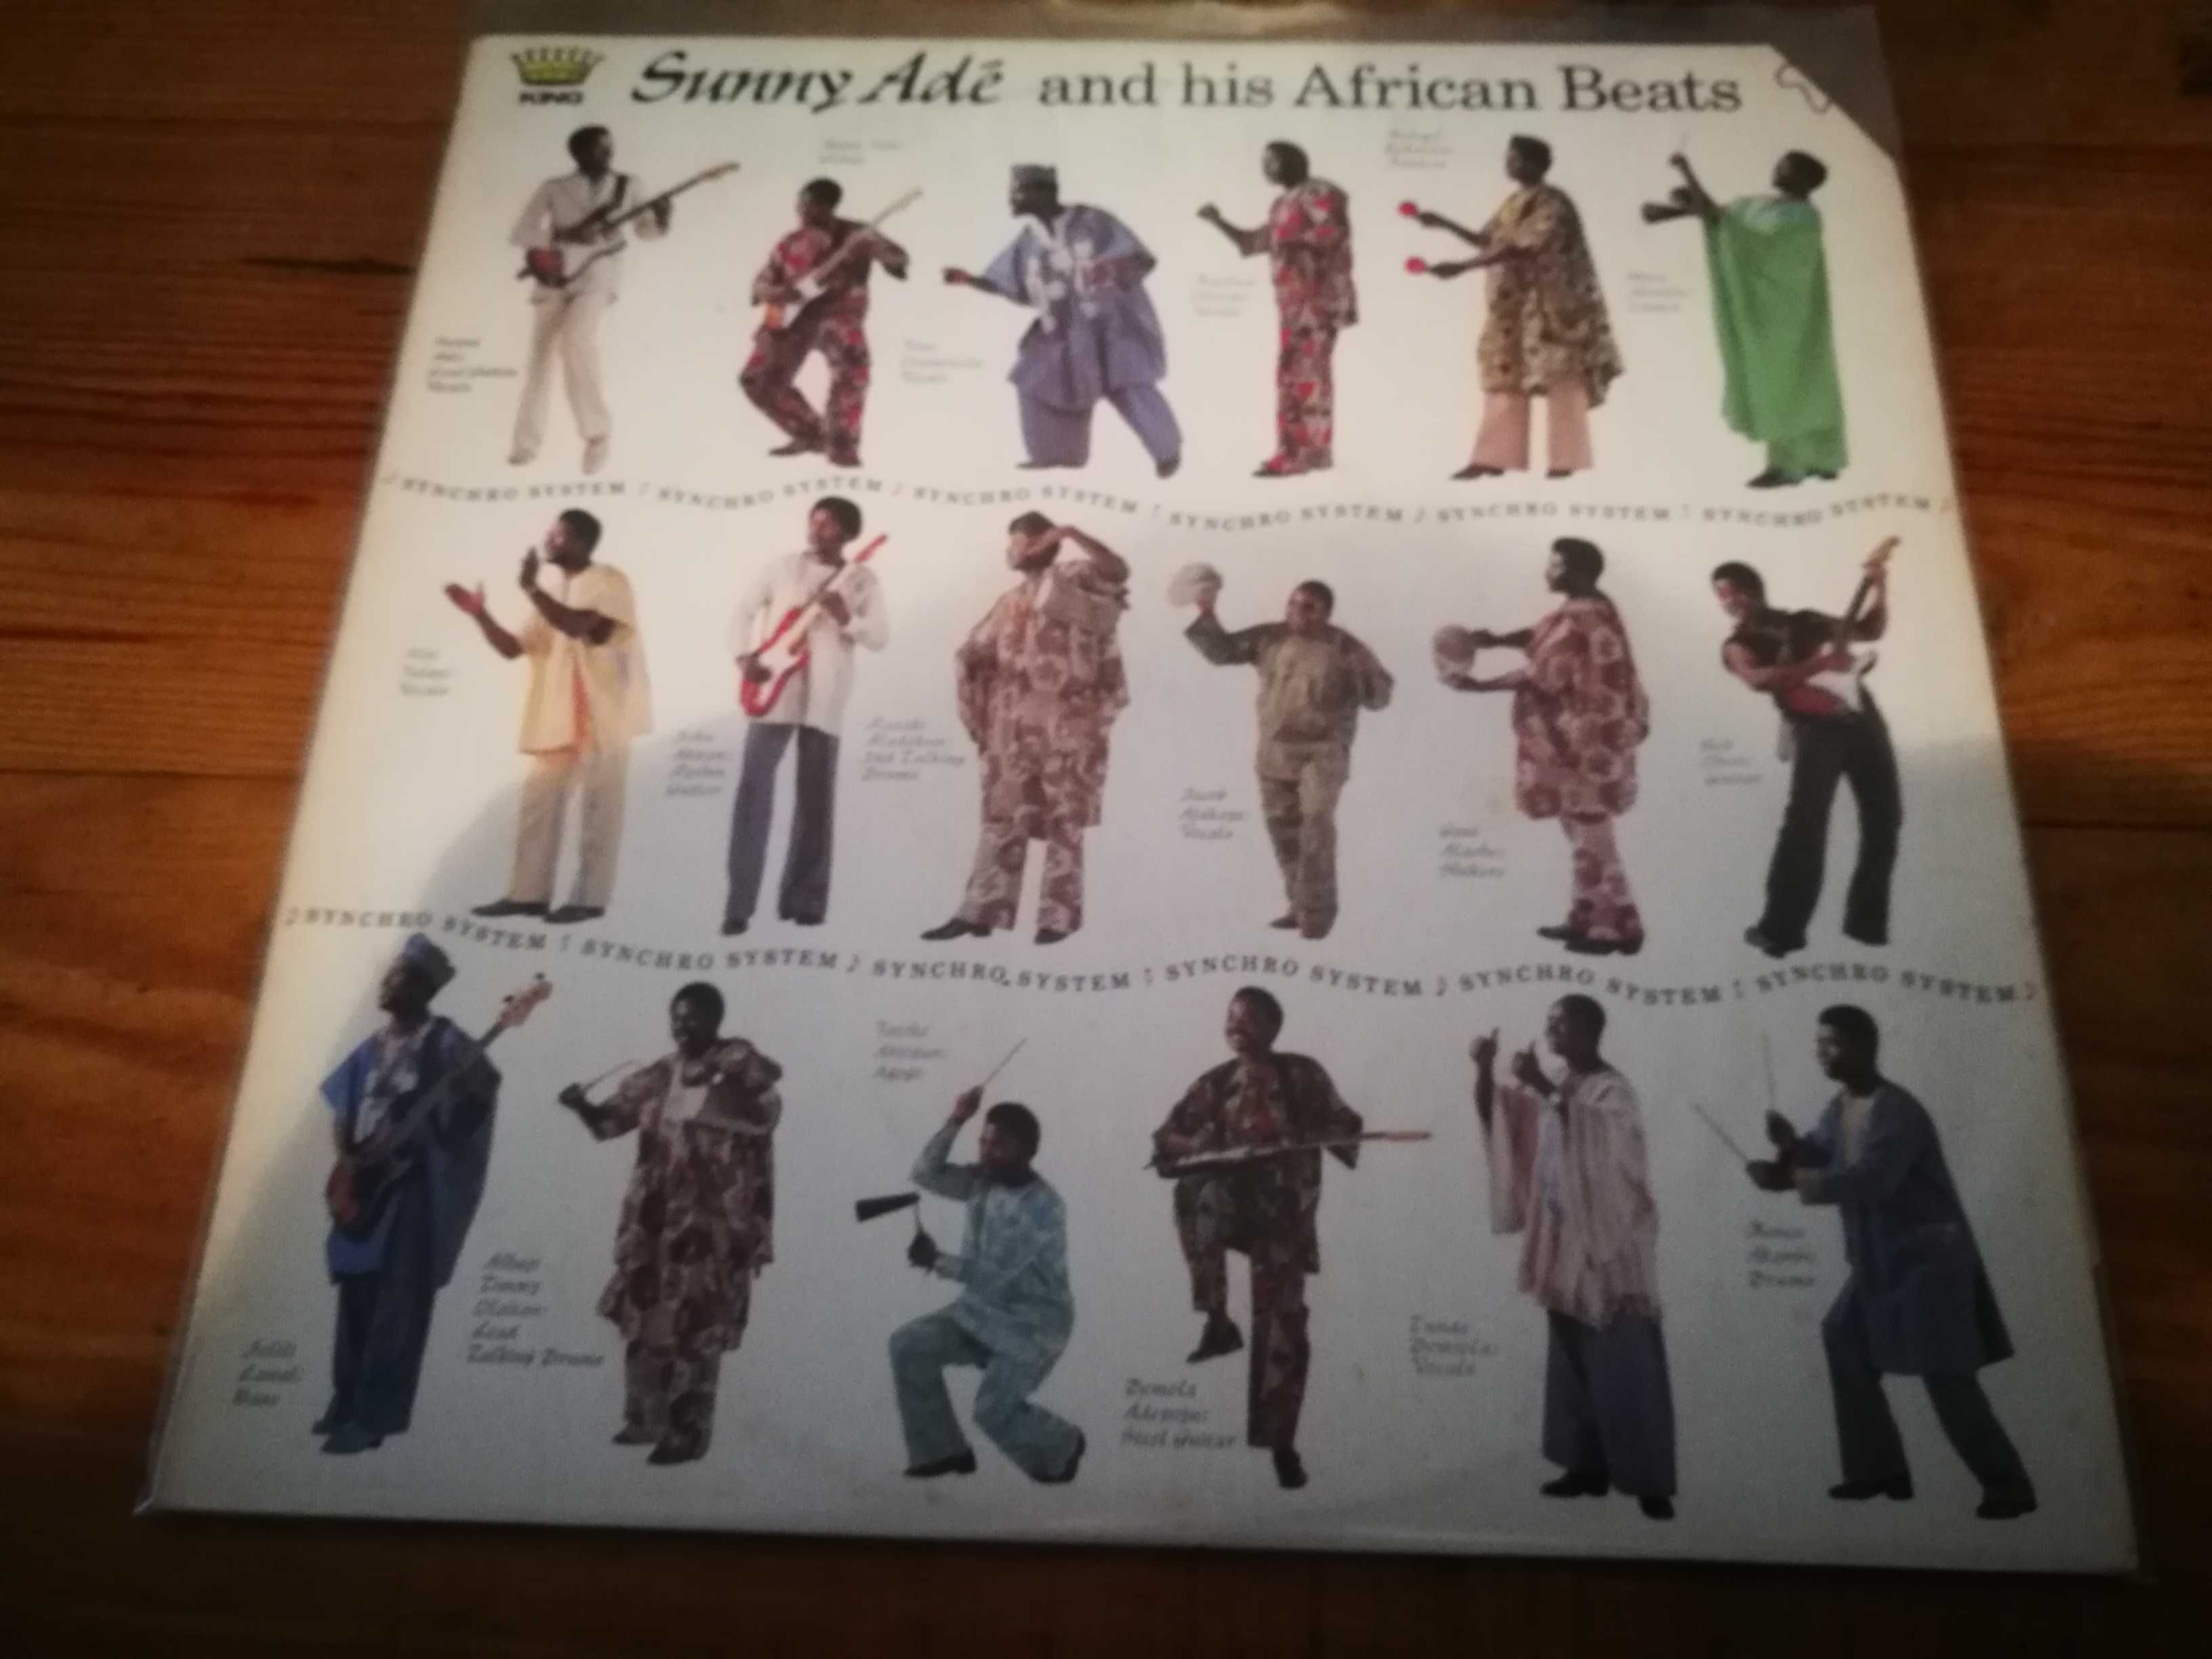 KING SUNNY ADÉ & HIS AFRICAN BEATS (Africano) - Synchro System LP